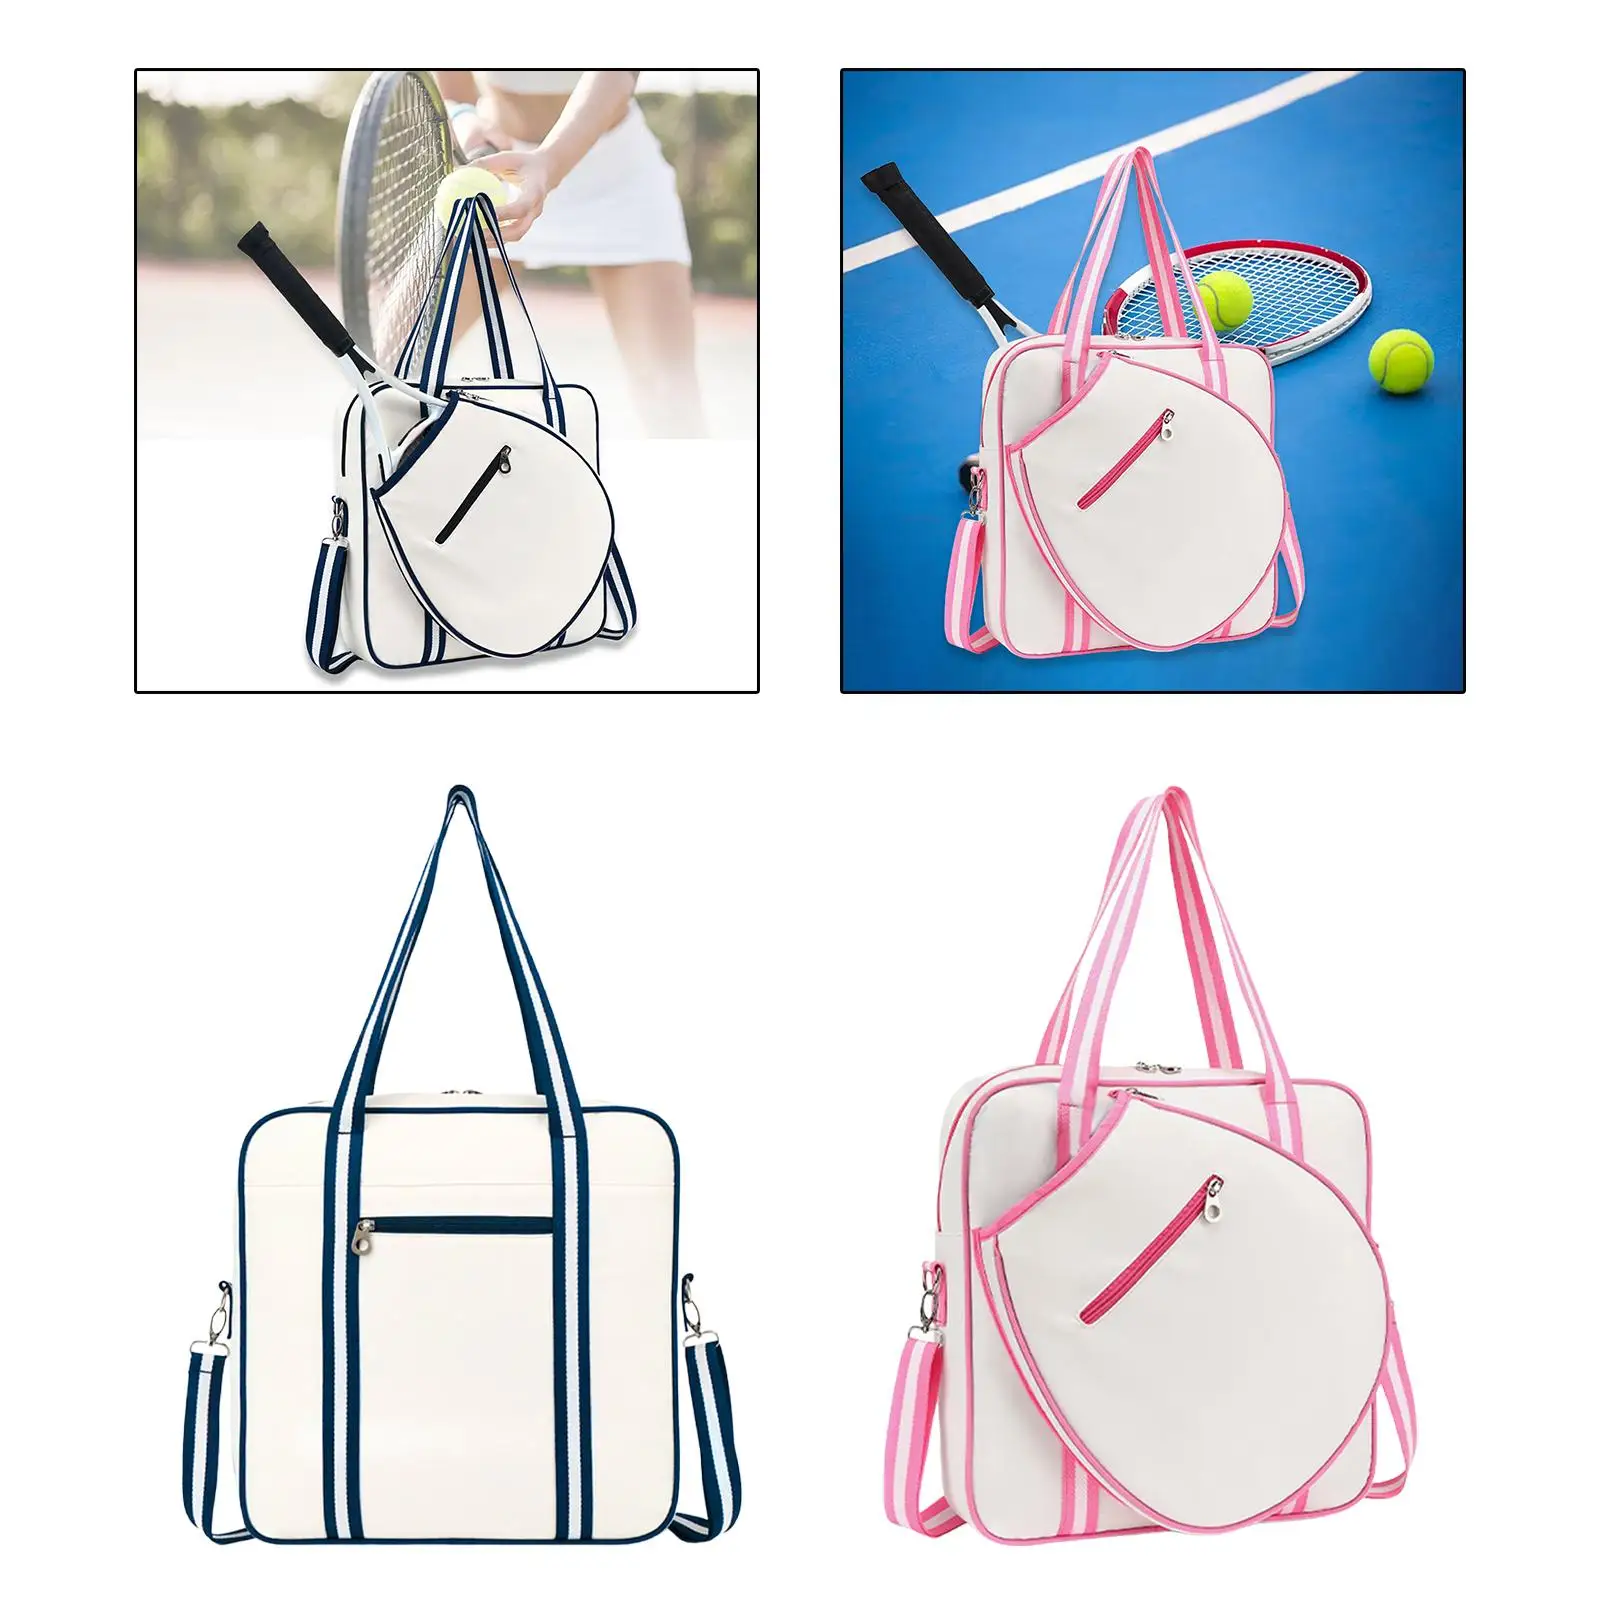 Tennis Racket Shoulder Bag Travel Tote Bag Sturdy Stylish Multipurpose 15x4x15inch with Front Pocket for Outdoor Activities